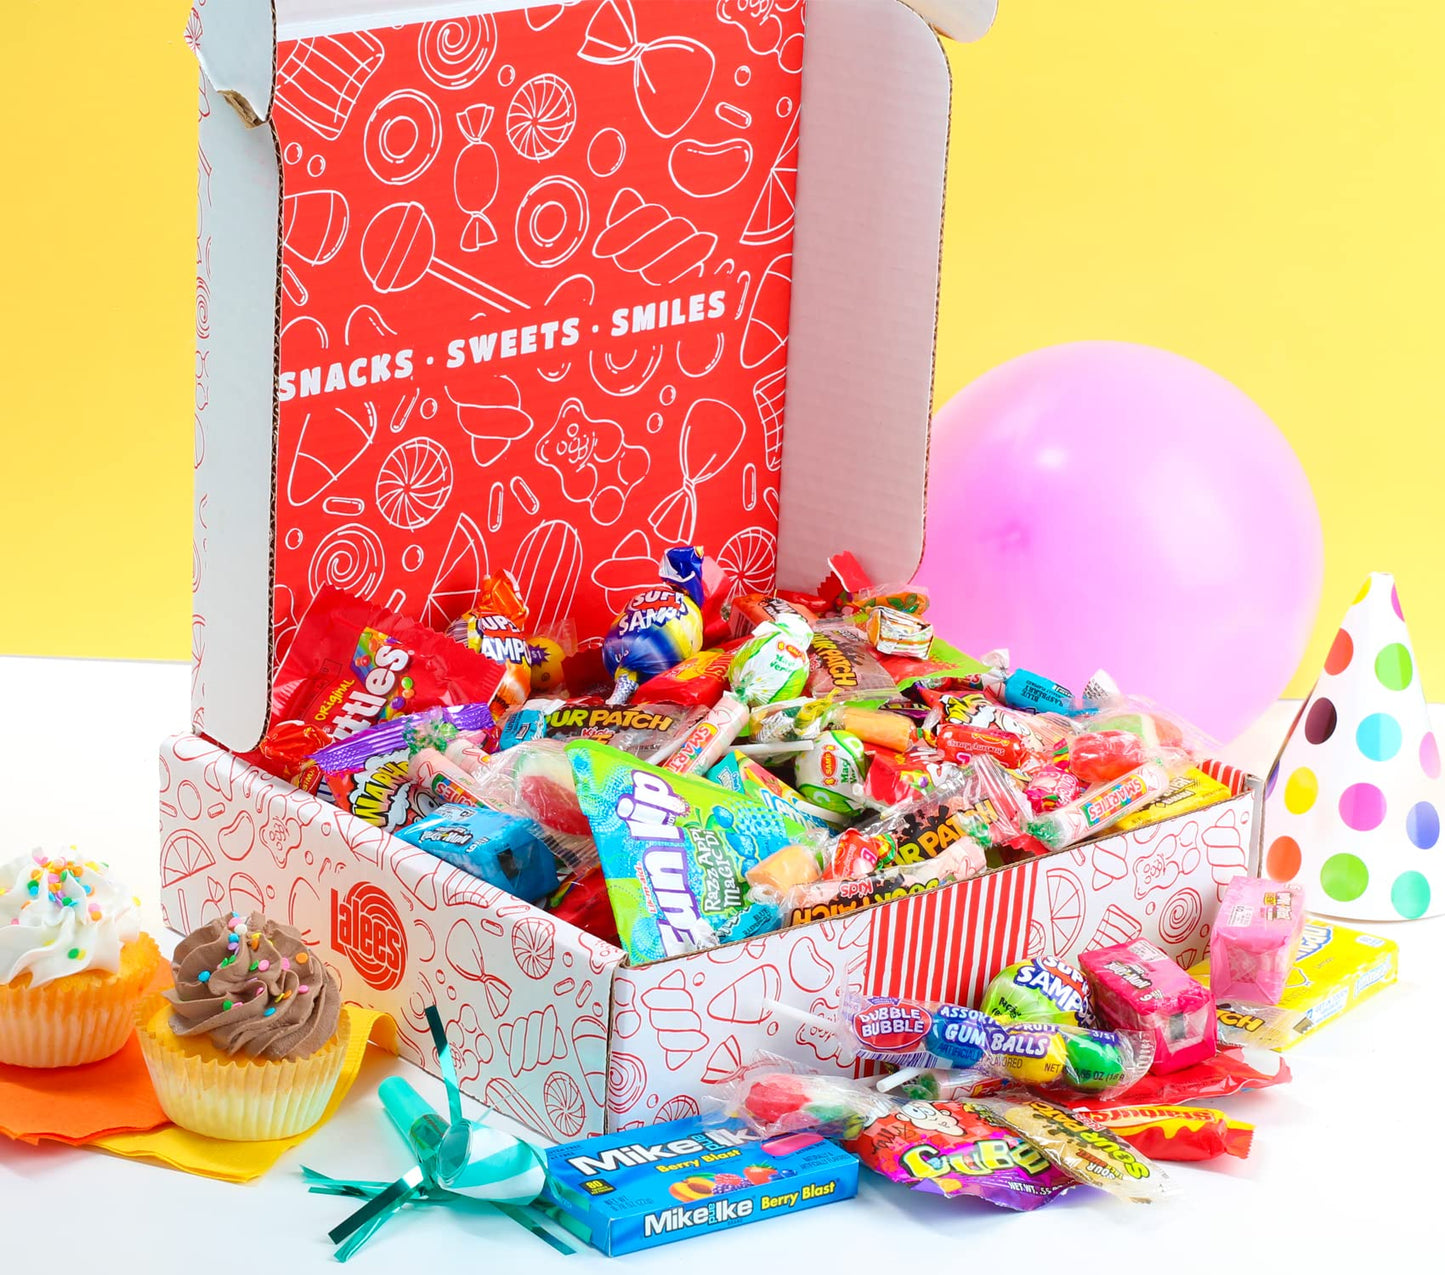 Lalees Candy Gift Box - 3 Pounds - Candy Gift Basket - Care Package for Kids/Adults - Candy Cravebox - College, Birthdays, Camp